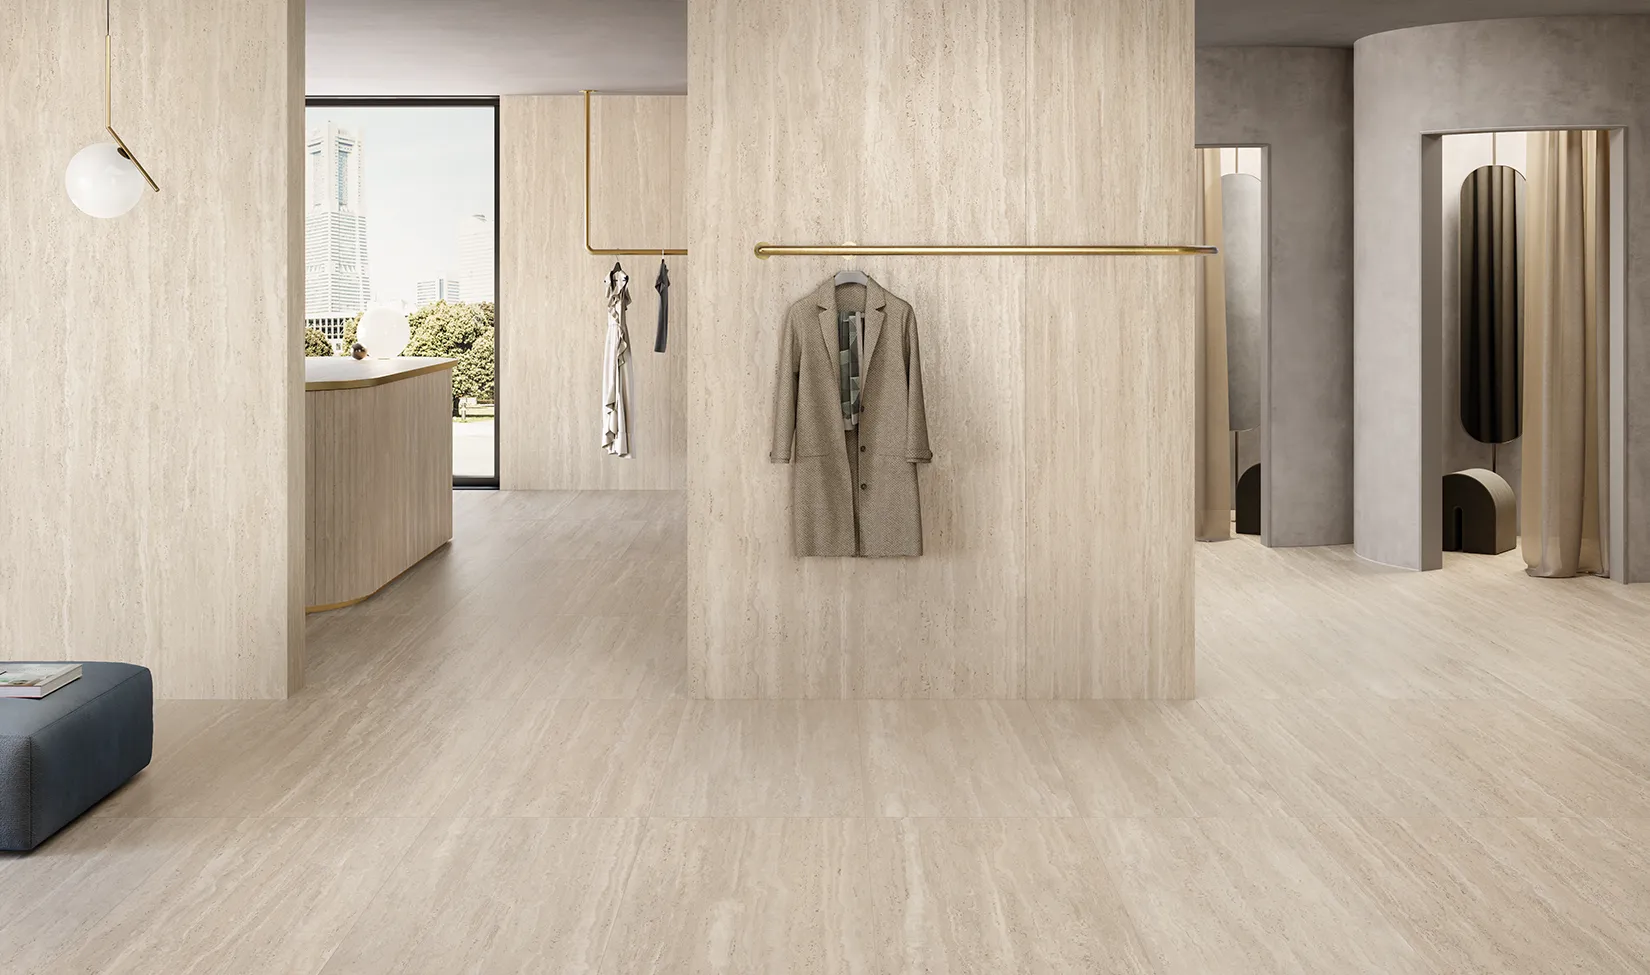 Floor and wall with Walnut travertine-effect tiles from the Trevi collection in a modern office with hanging jacket and cityscape.